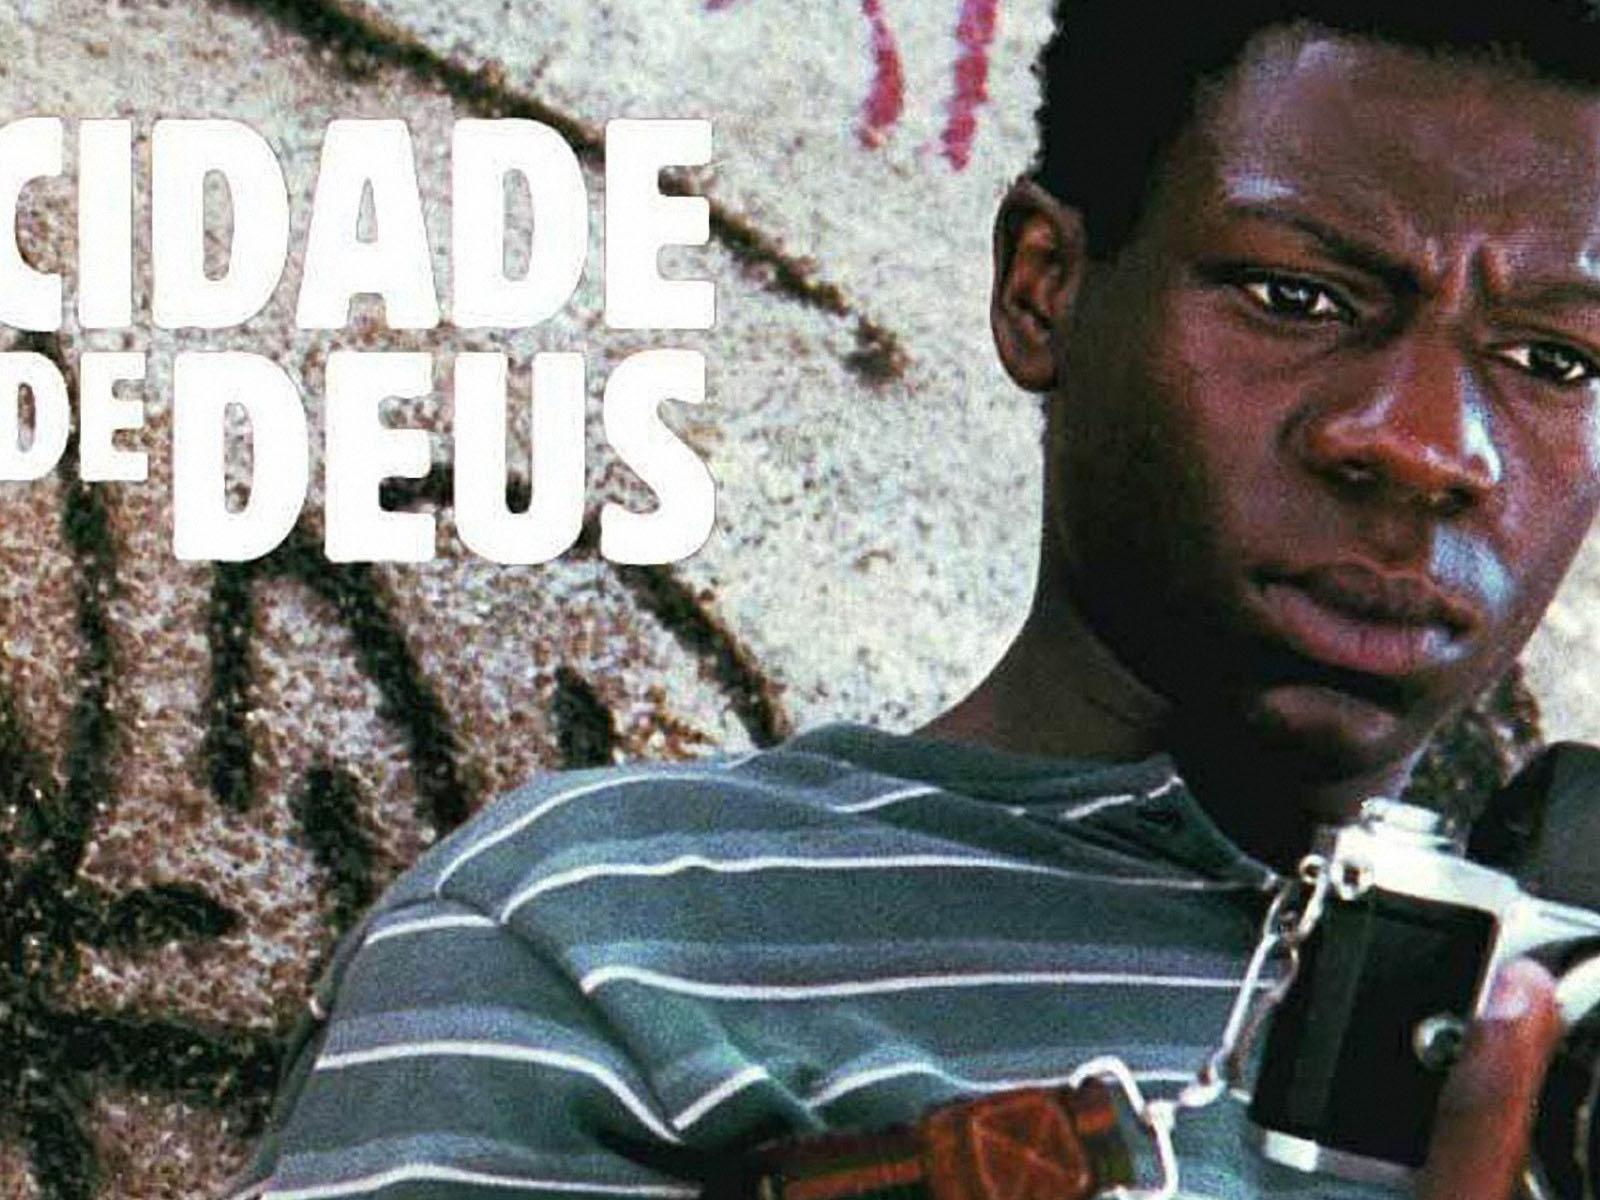 city of god Wallpapers - Free city of god Wallpapers & Pictures ...